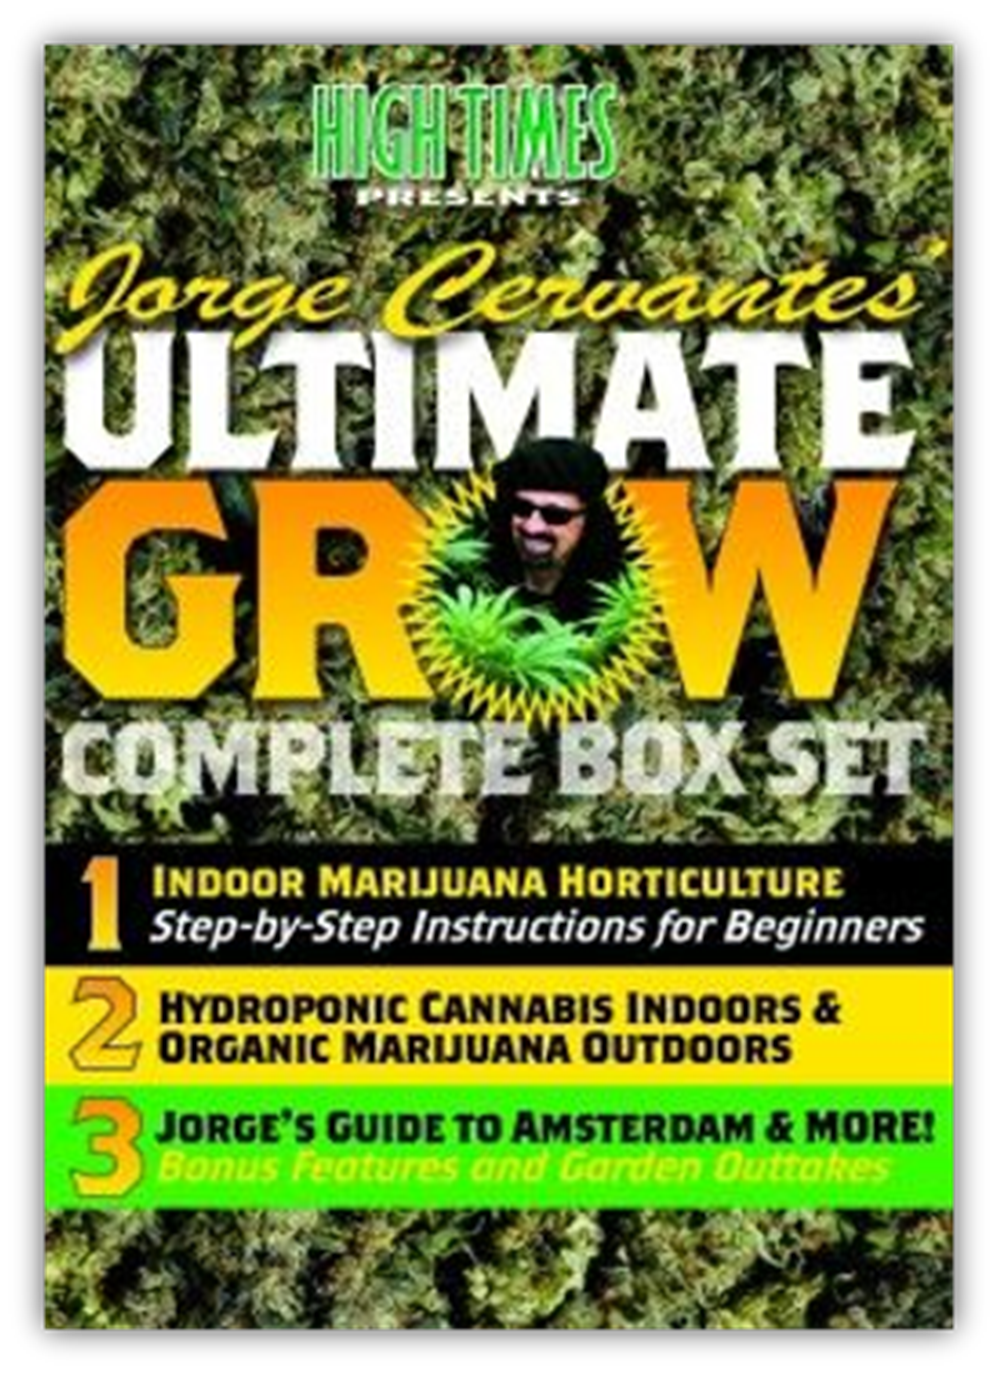 ULTIMATE GROW COMPLETE BOX SET DVD